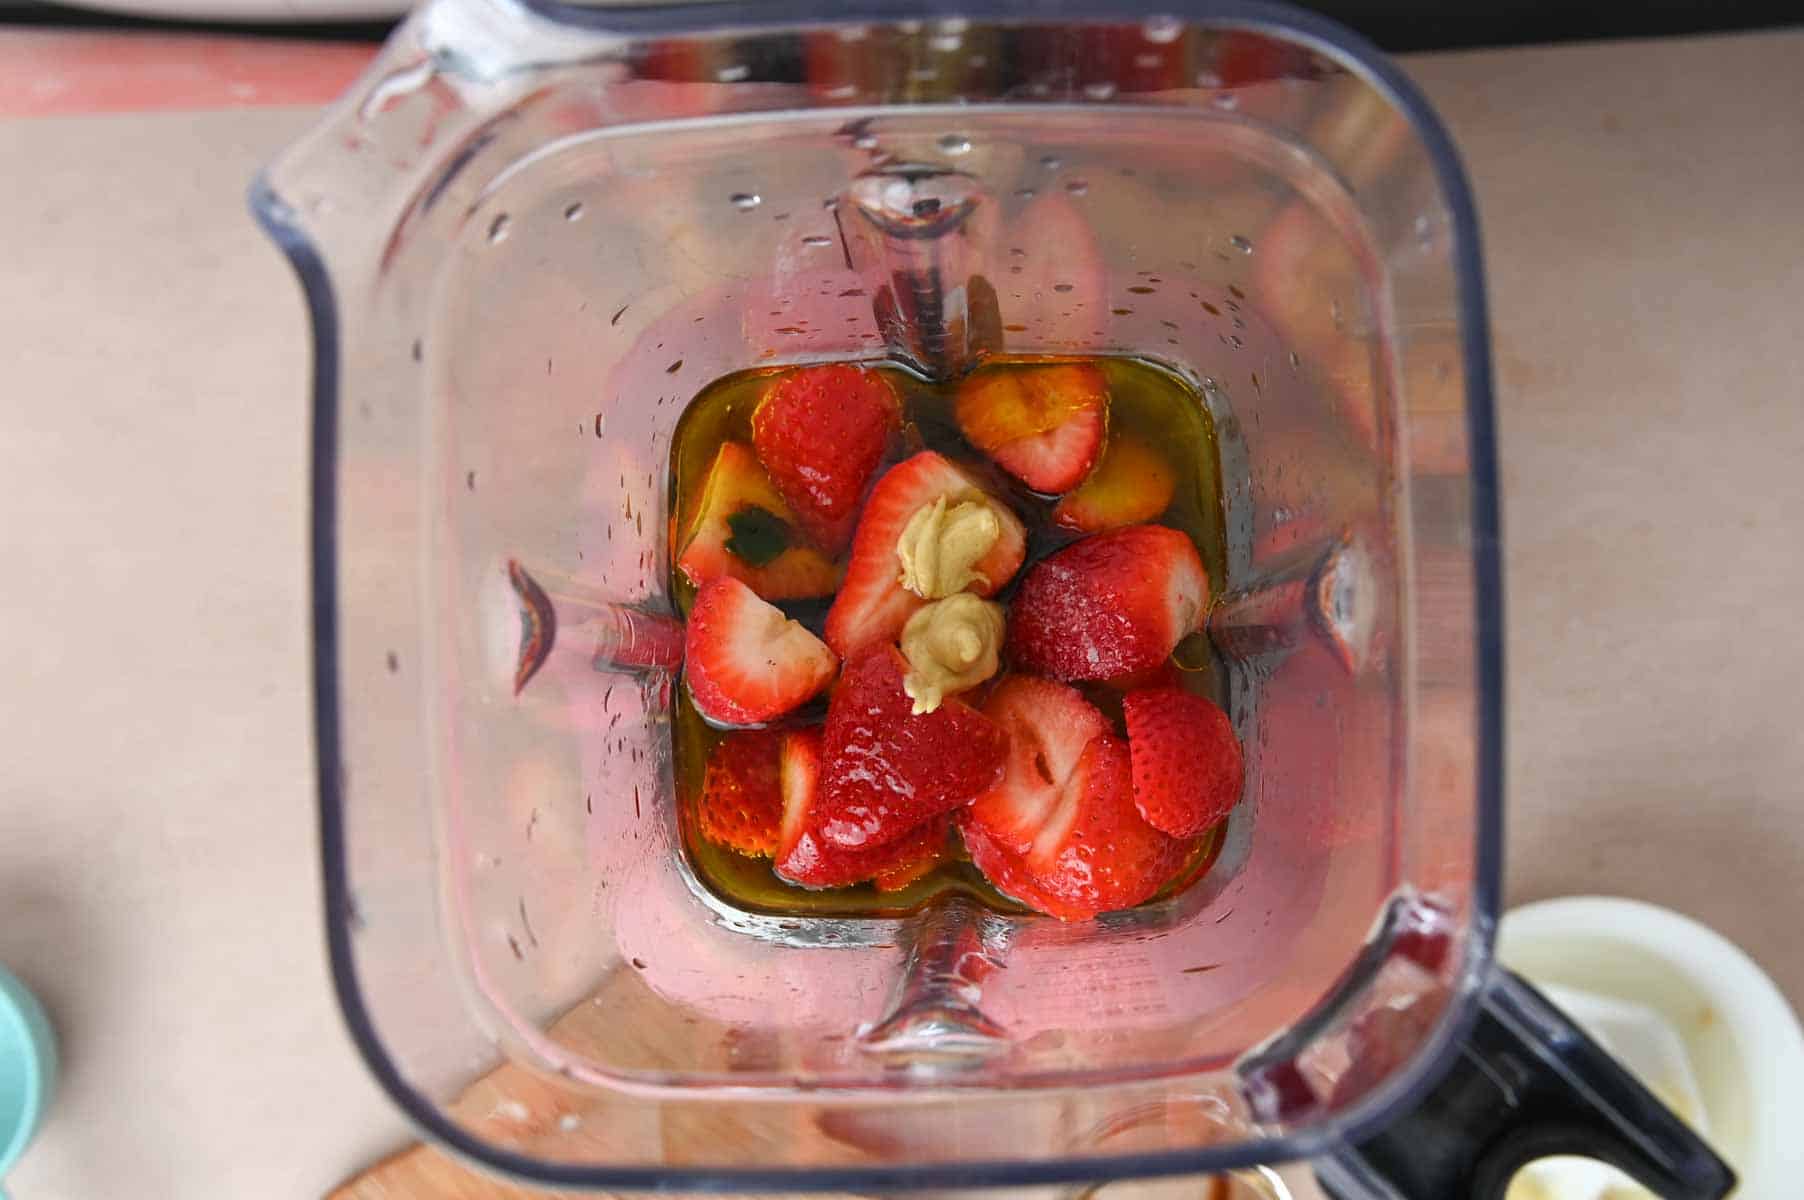 Top-down view of blender filled with unblended strawberries and vinegar.